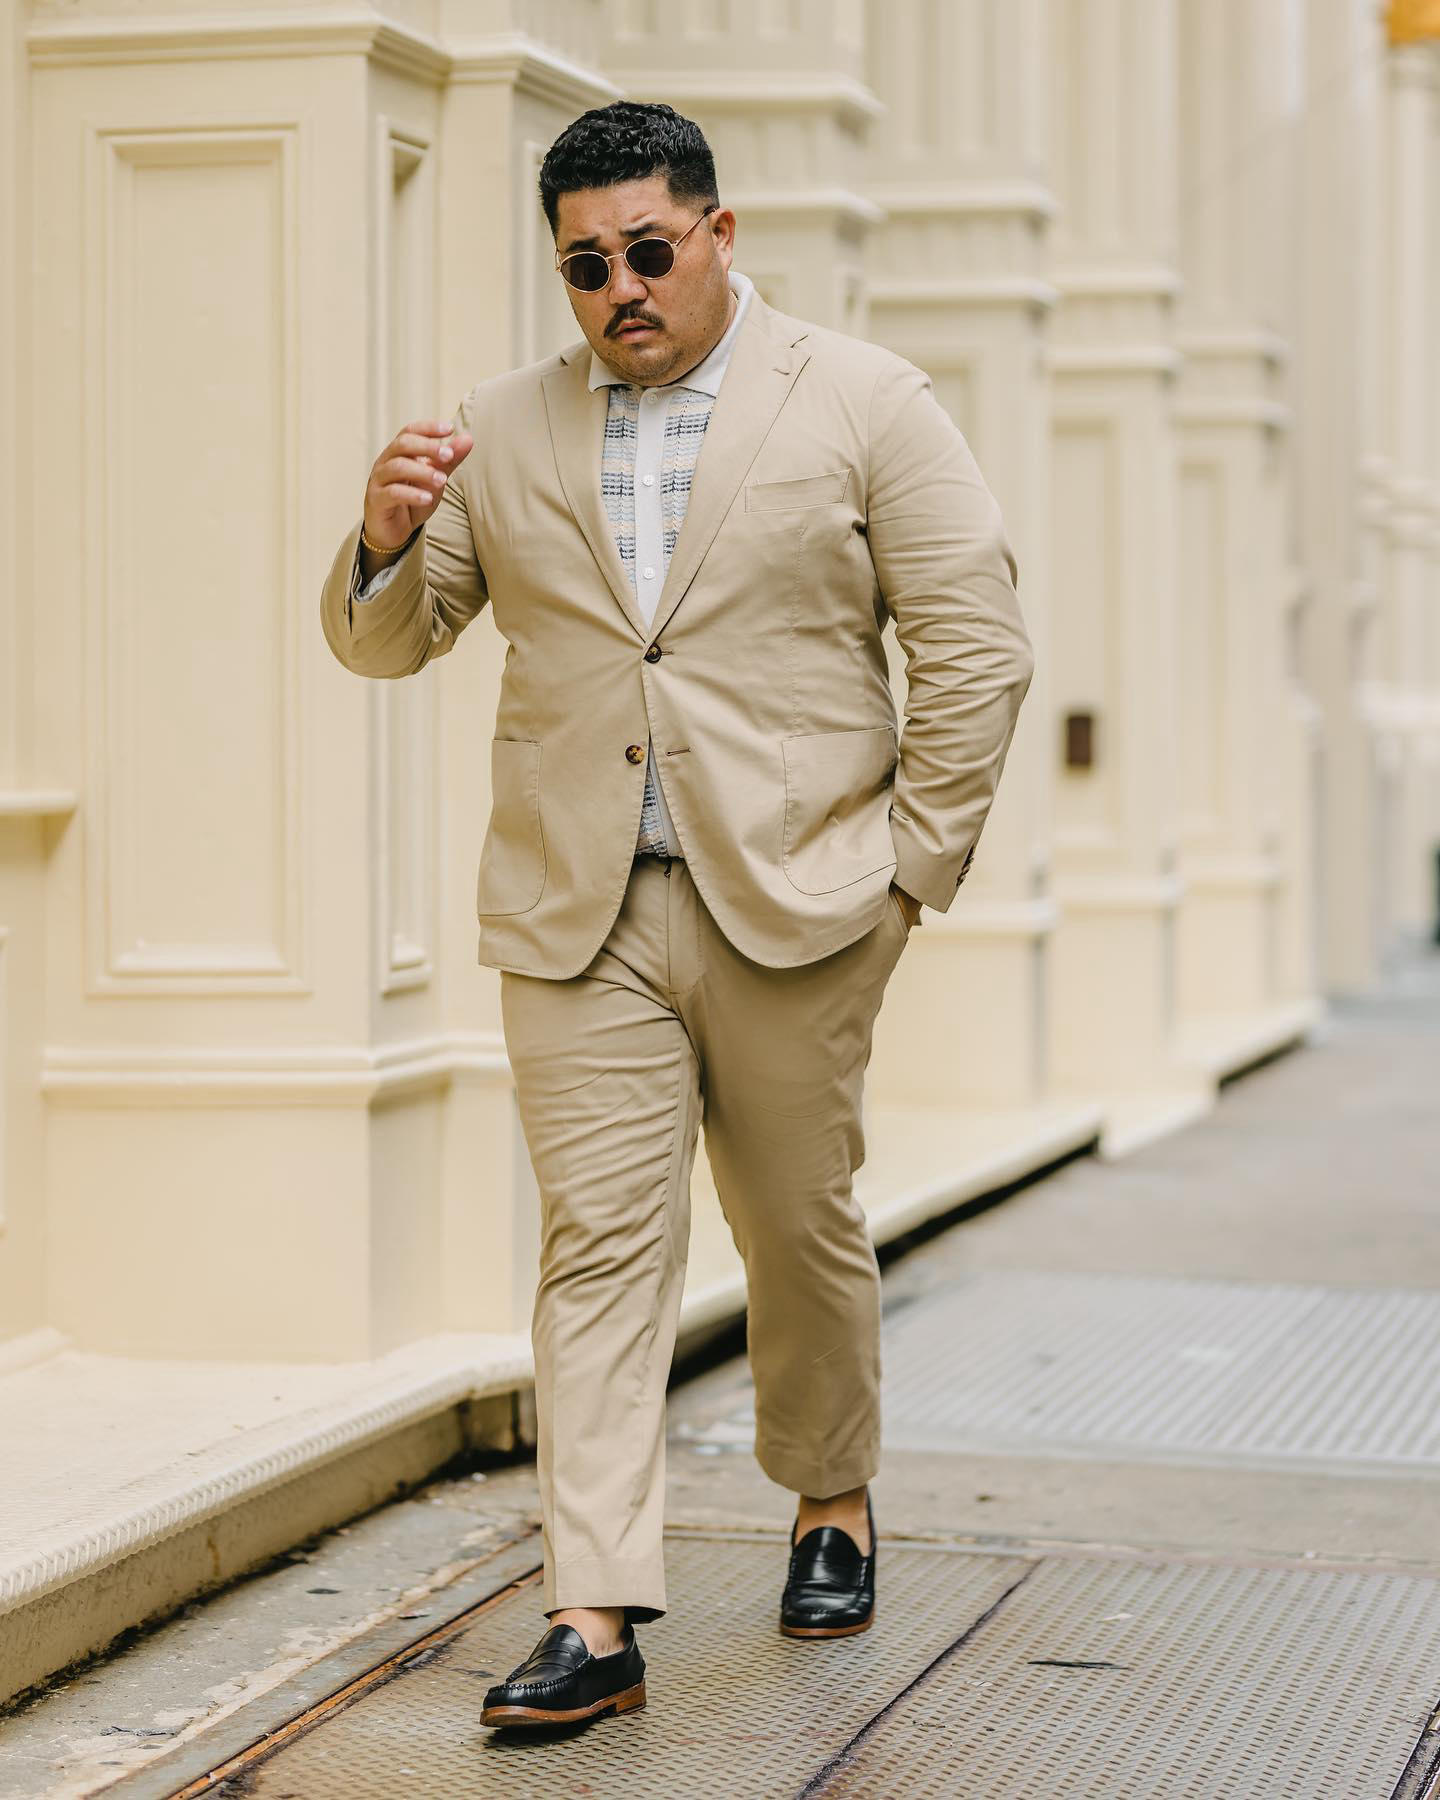 Nick Urteaga - A well fitted suit is easily the best thing you can have in your closet